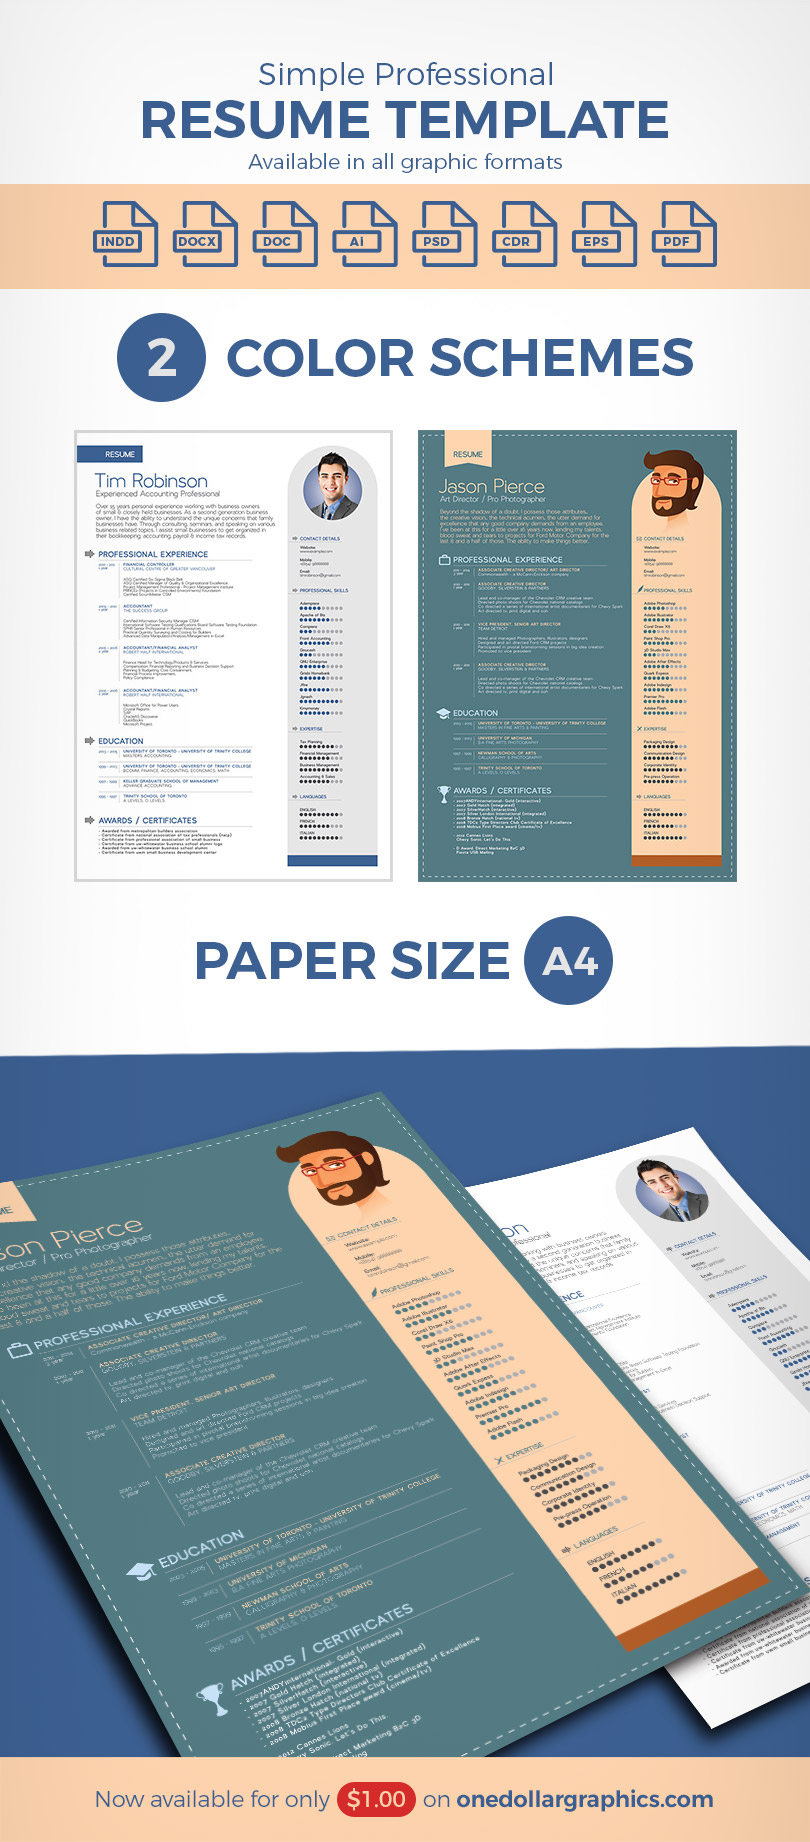 simple-professional-resume-template-in-ai-word-cdr-indd-eps-psd-format-2